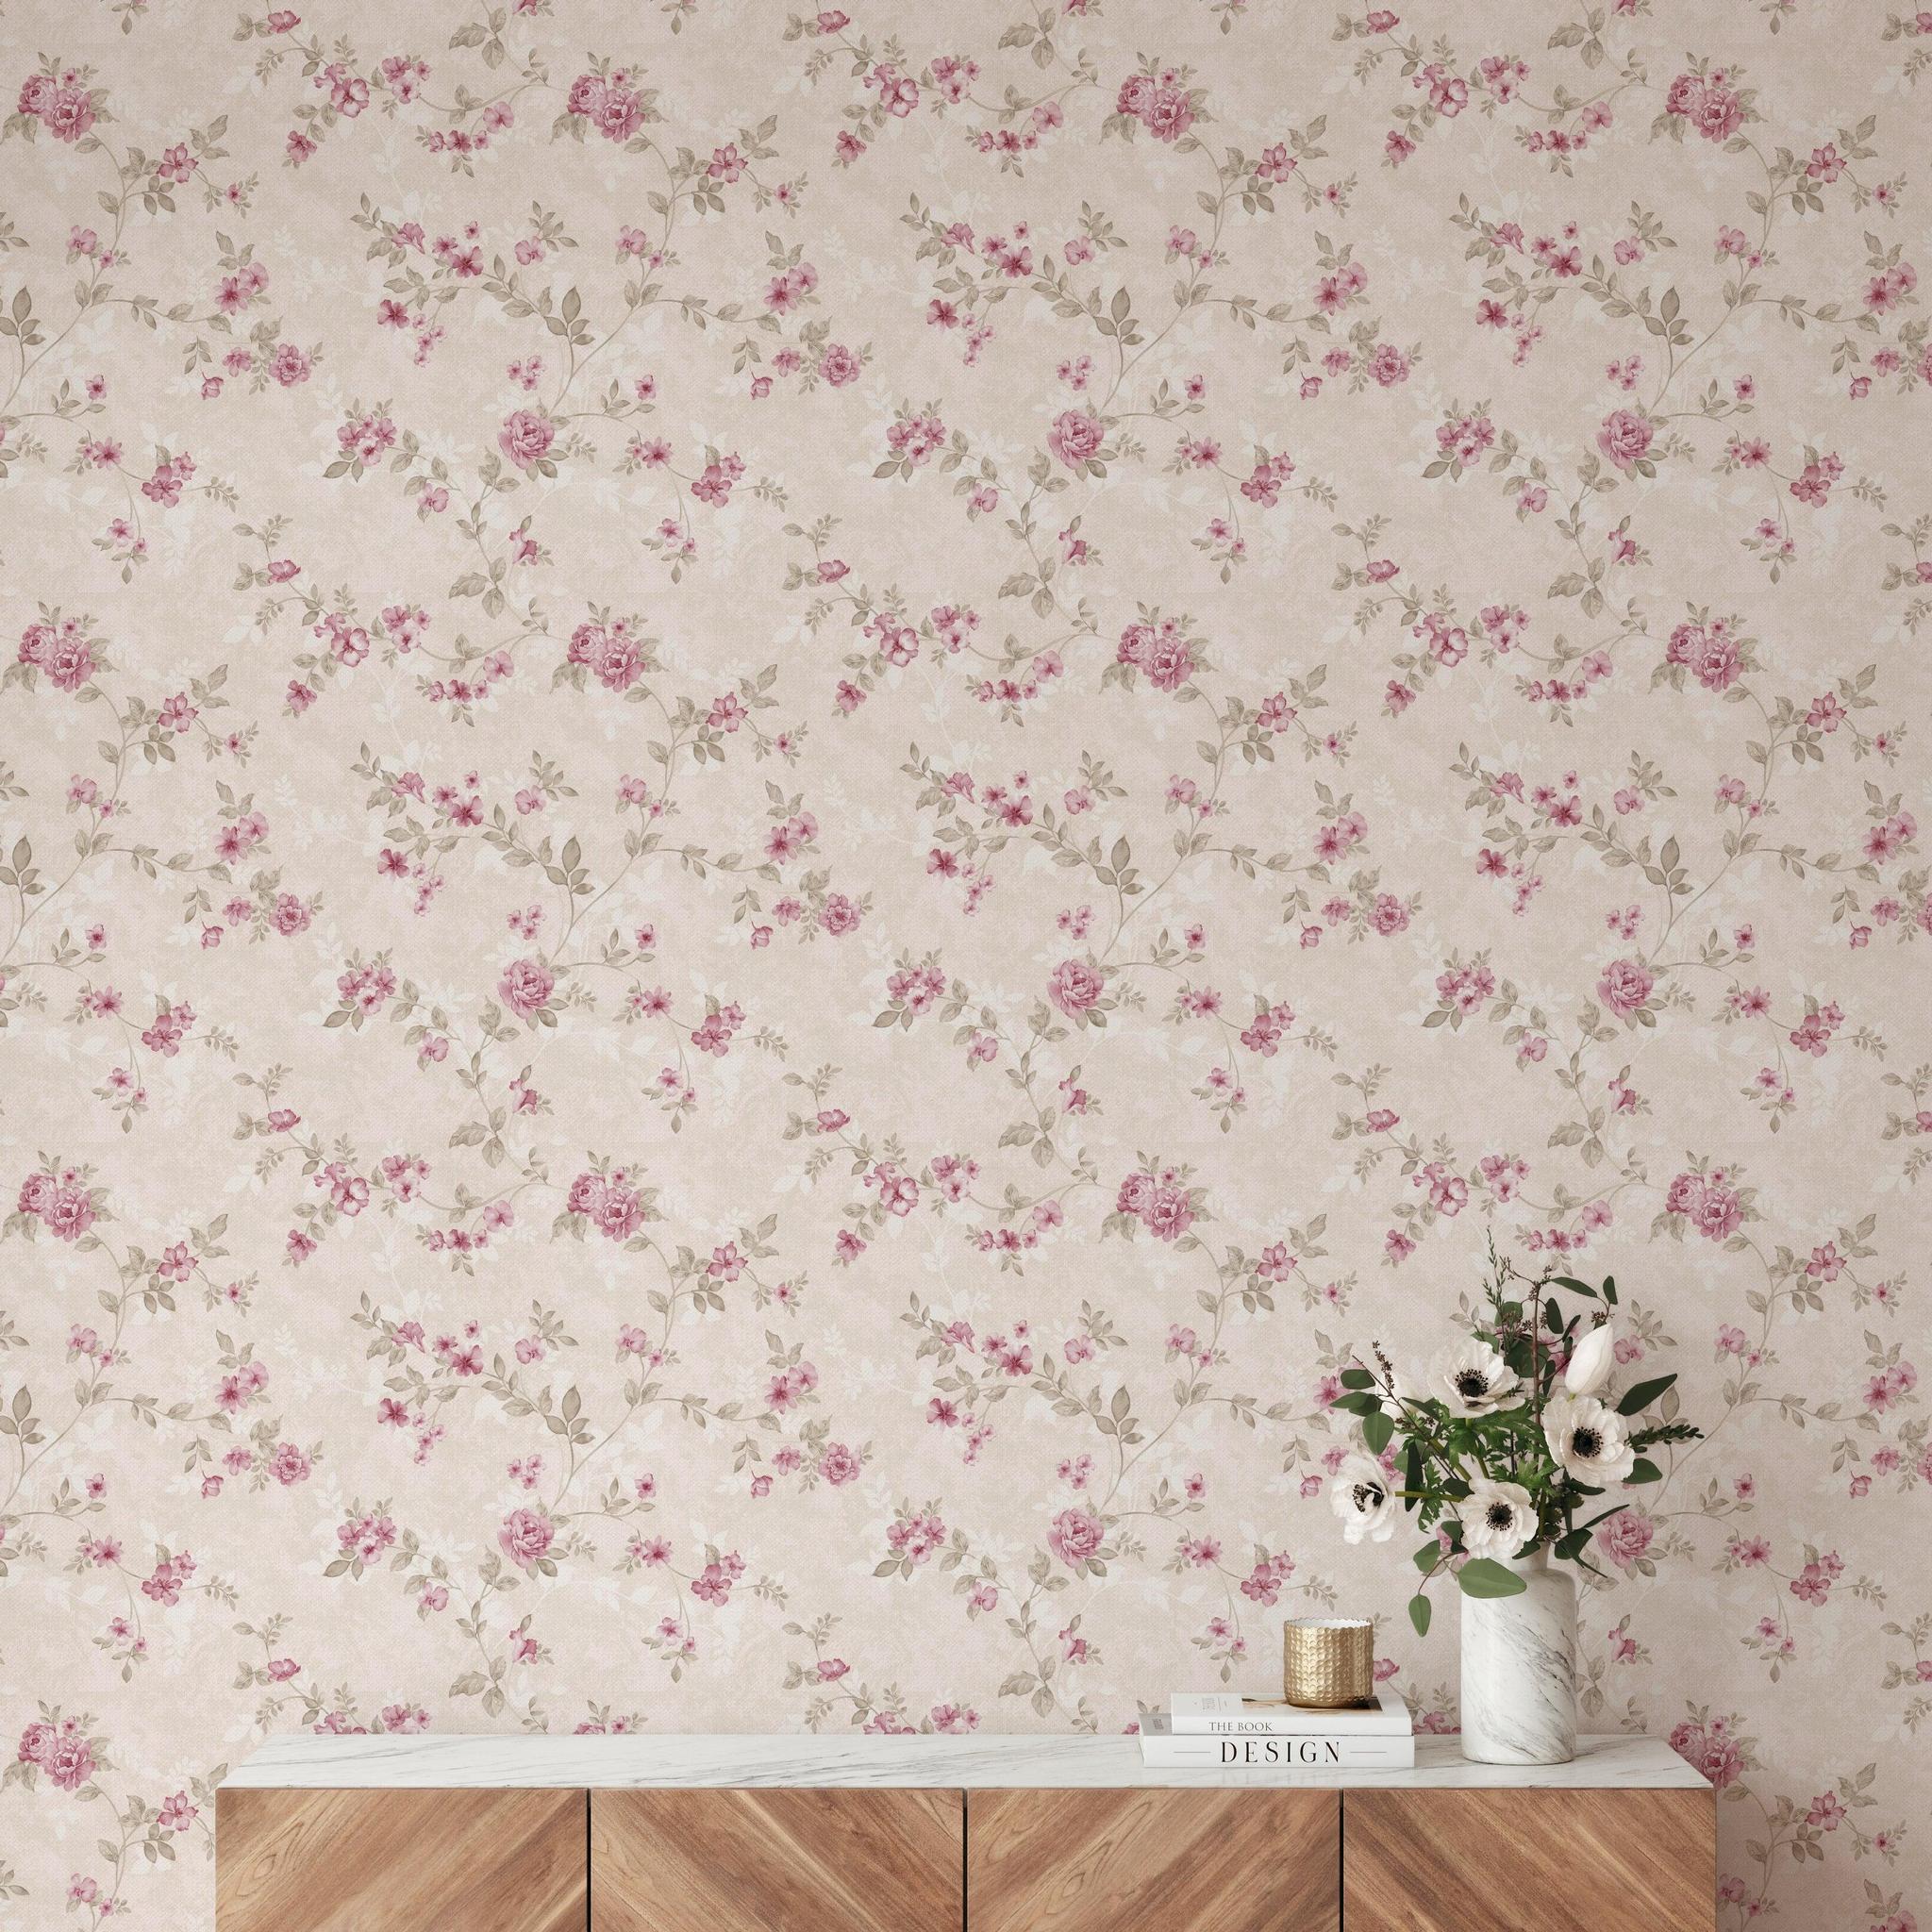 Coco's Cottage Wallpaper from The 7th Haven Interiors, elegant floral design in a living room setting.
